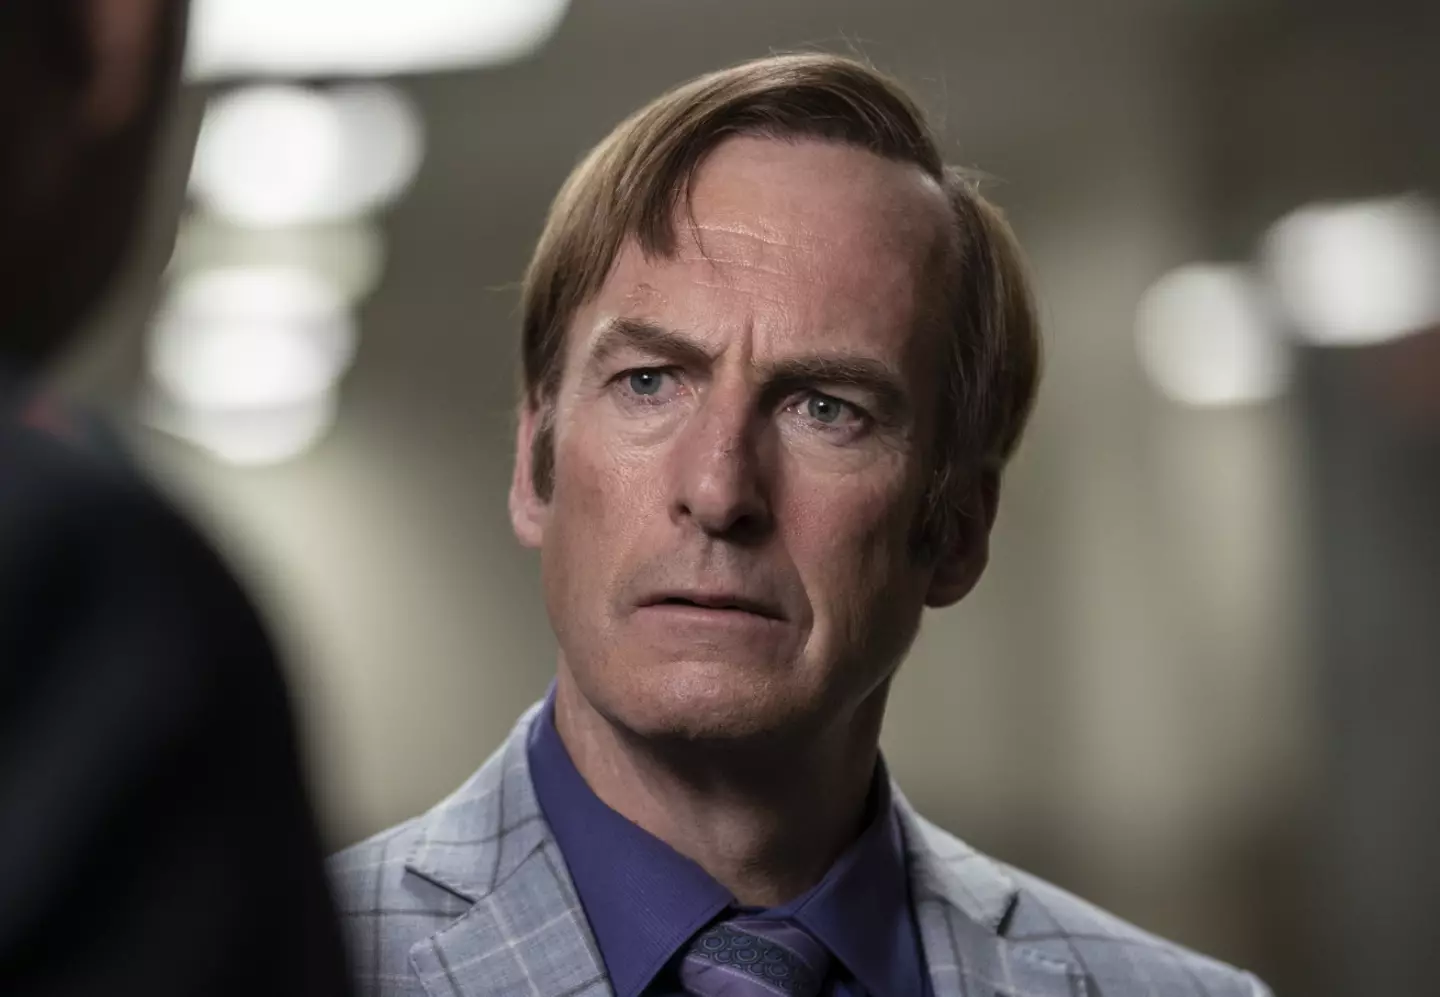 The final series of Better Call Saul began airing in April.